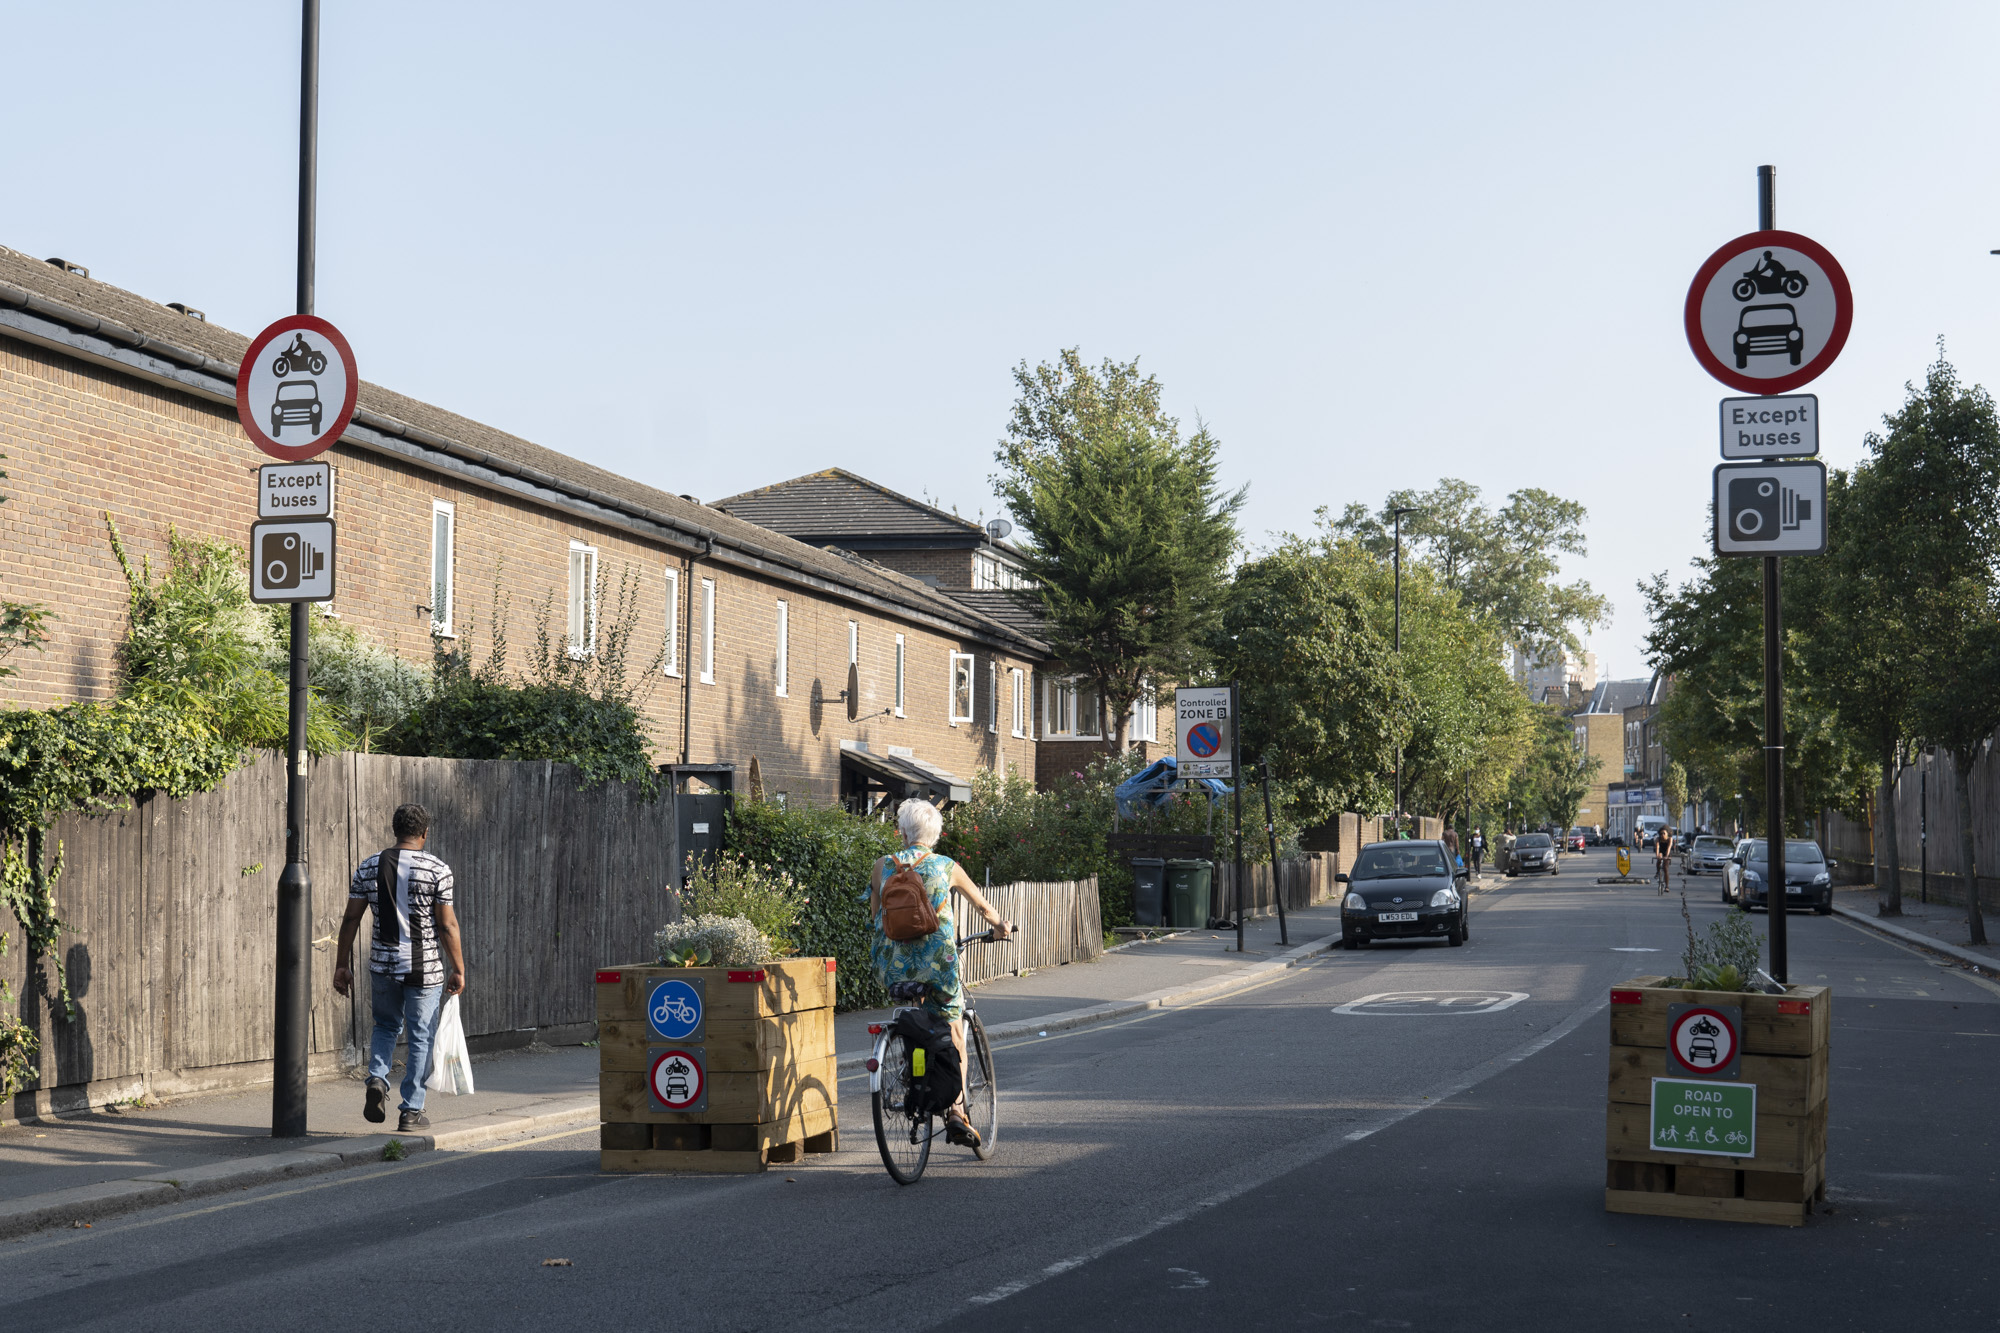 Lambeth Council confirms two Low Traffic Neighbourhoods to be made permanent